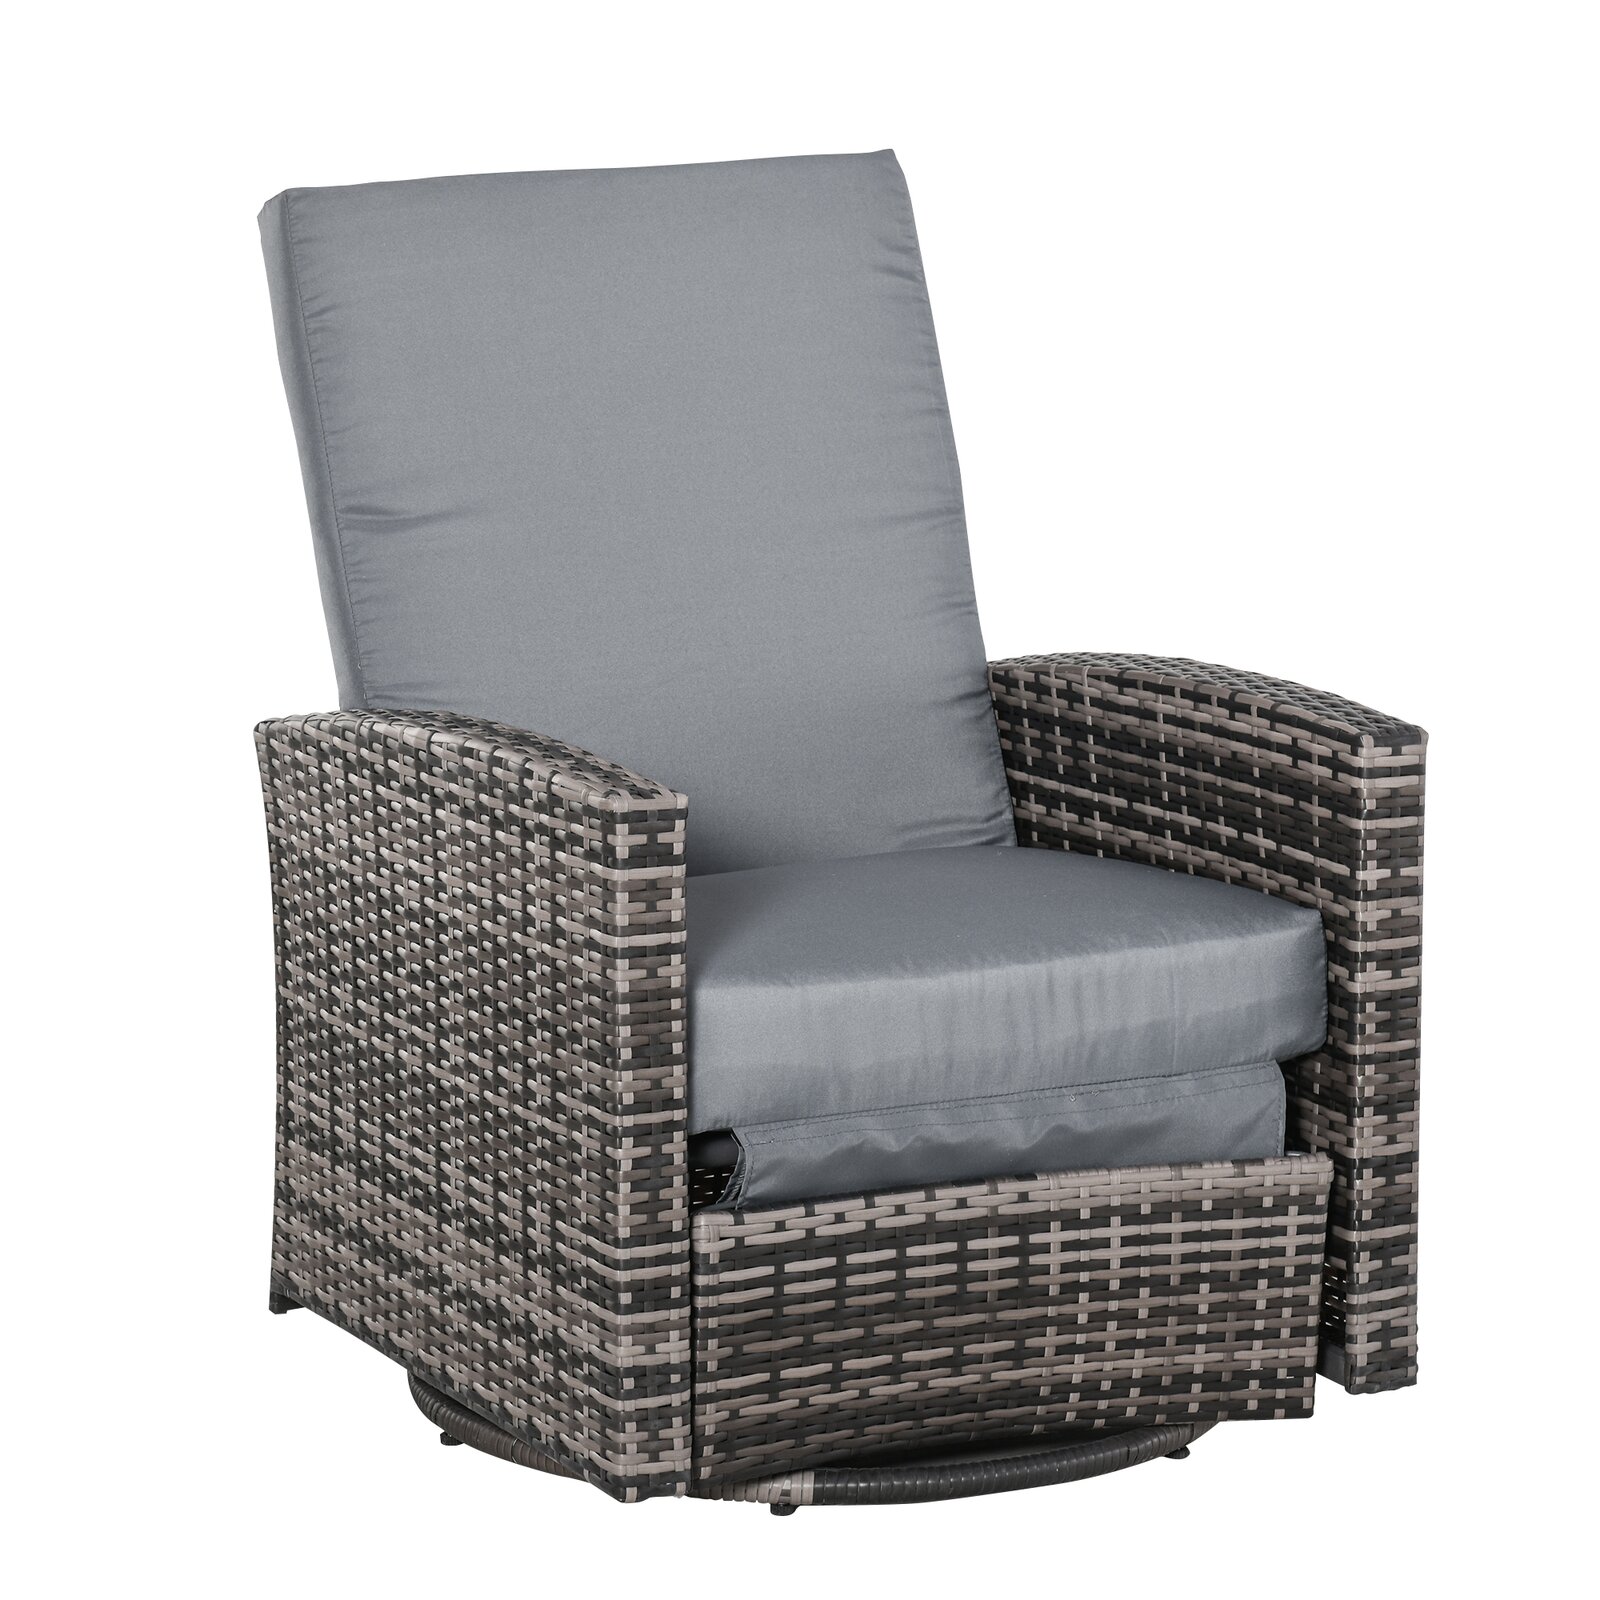 Harrill Swivel Recliner Patio Chair with Cushions, Reclining: Yes, Outer Frame Material: Wicker/Rattan - image 1 of 5